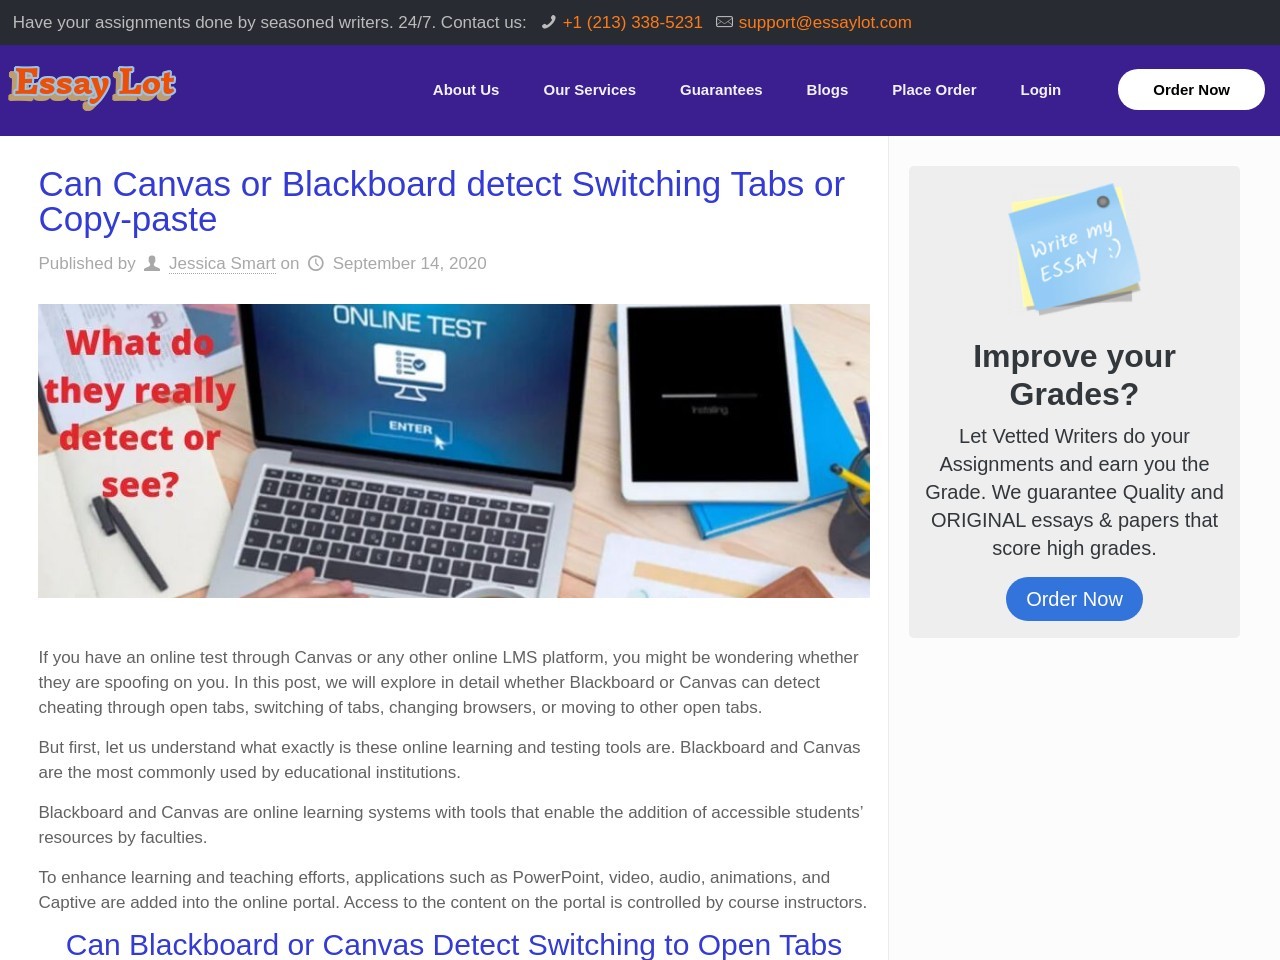 Can Canvas or Blackboard detect Switching Tabs or Copy-paste